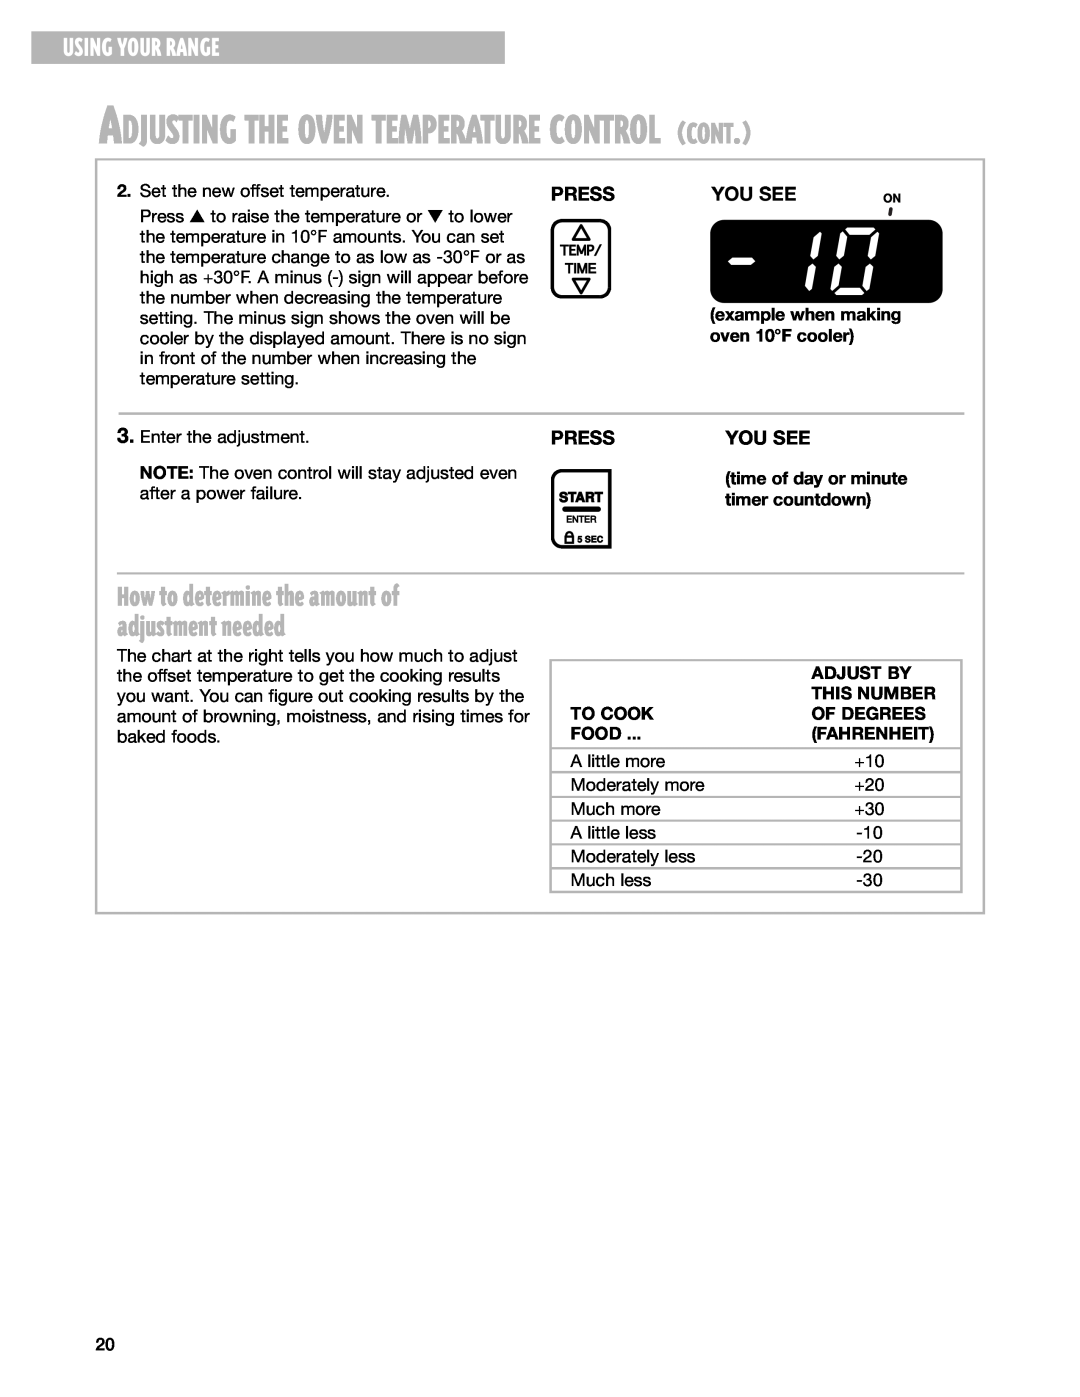 Whirlpool RF315PXG Adjusting The Oven Temperature Control Cont, Using Your Range, Press, You See, timer countdown, To Cook 